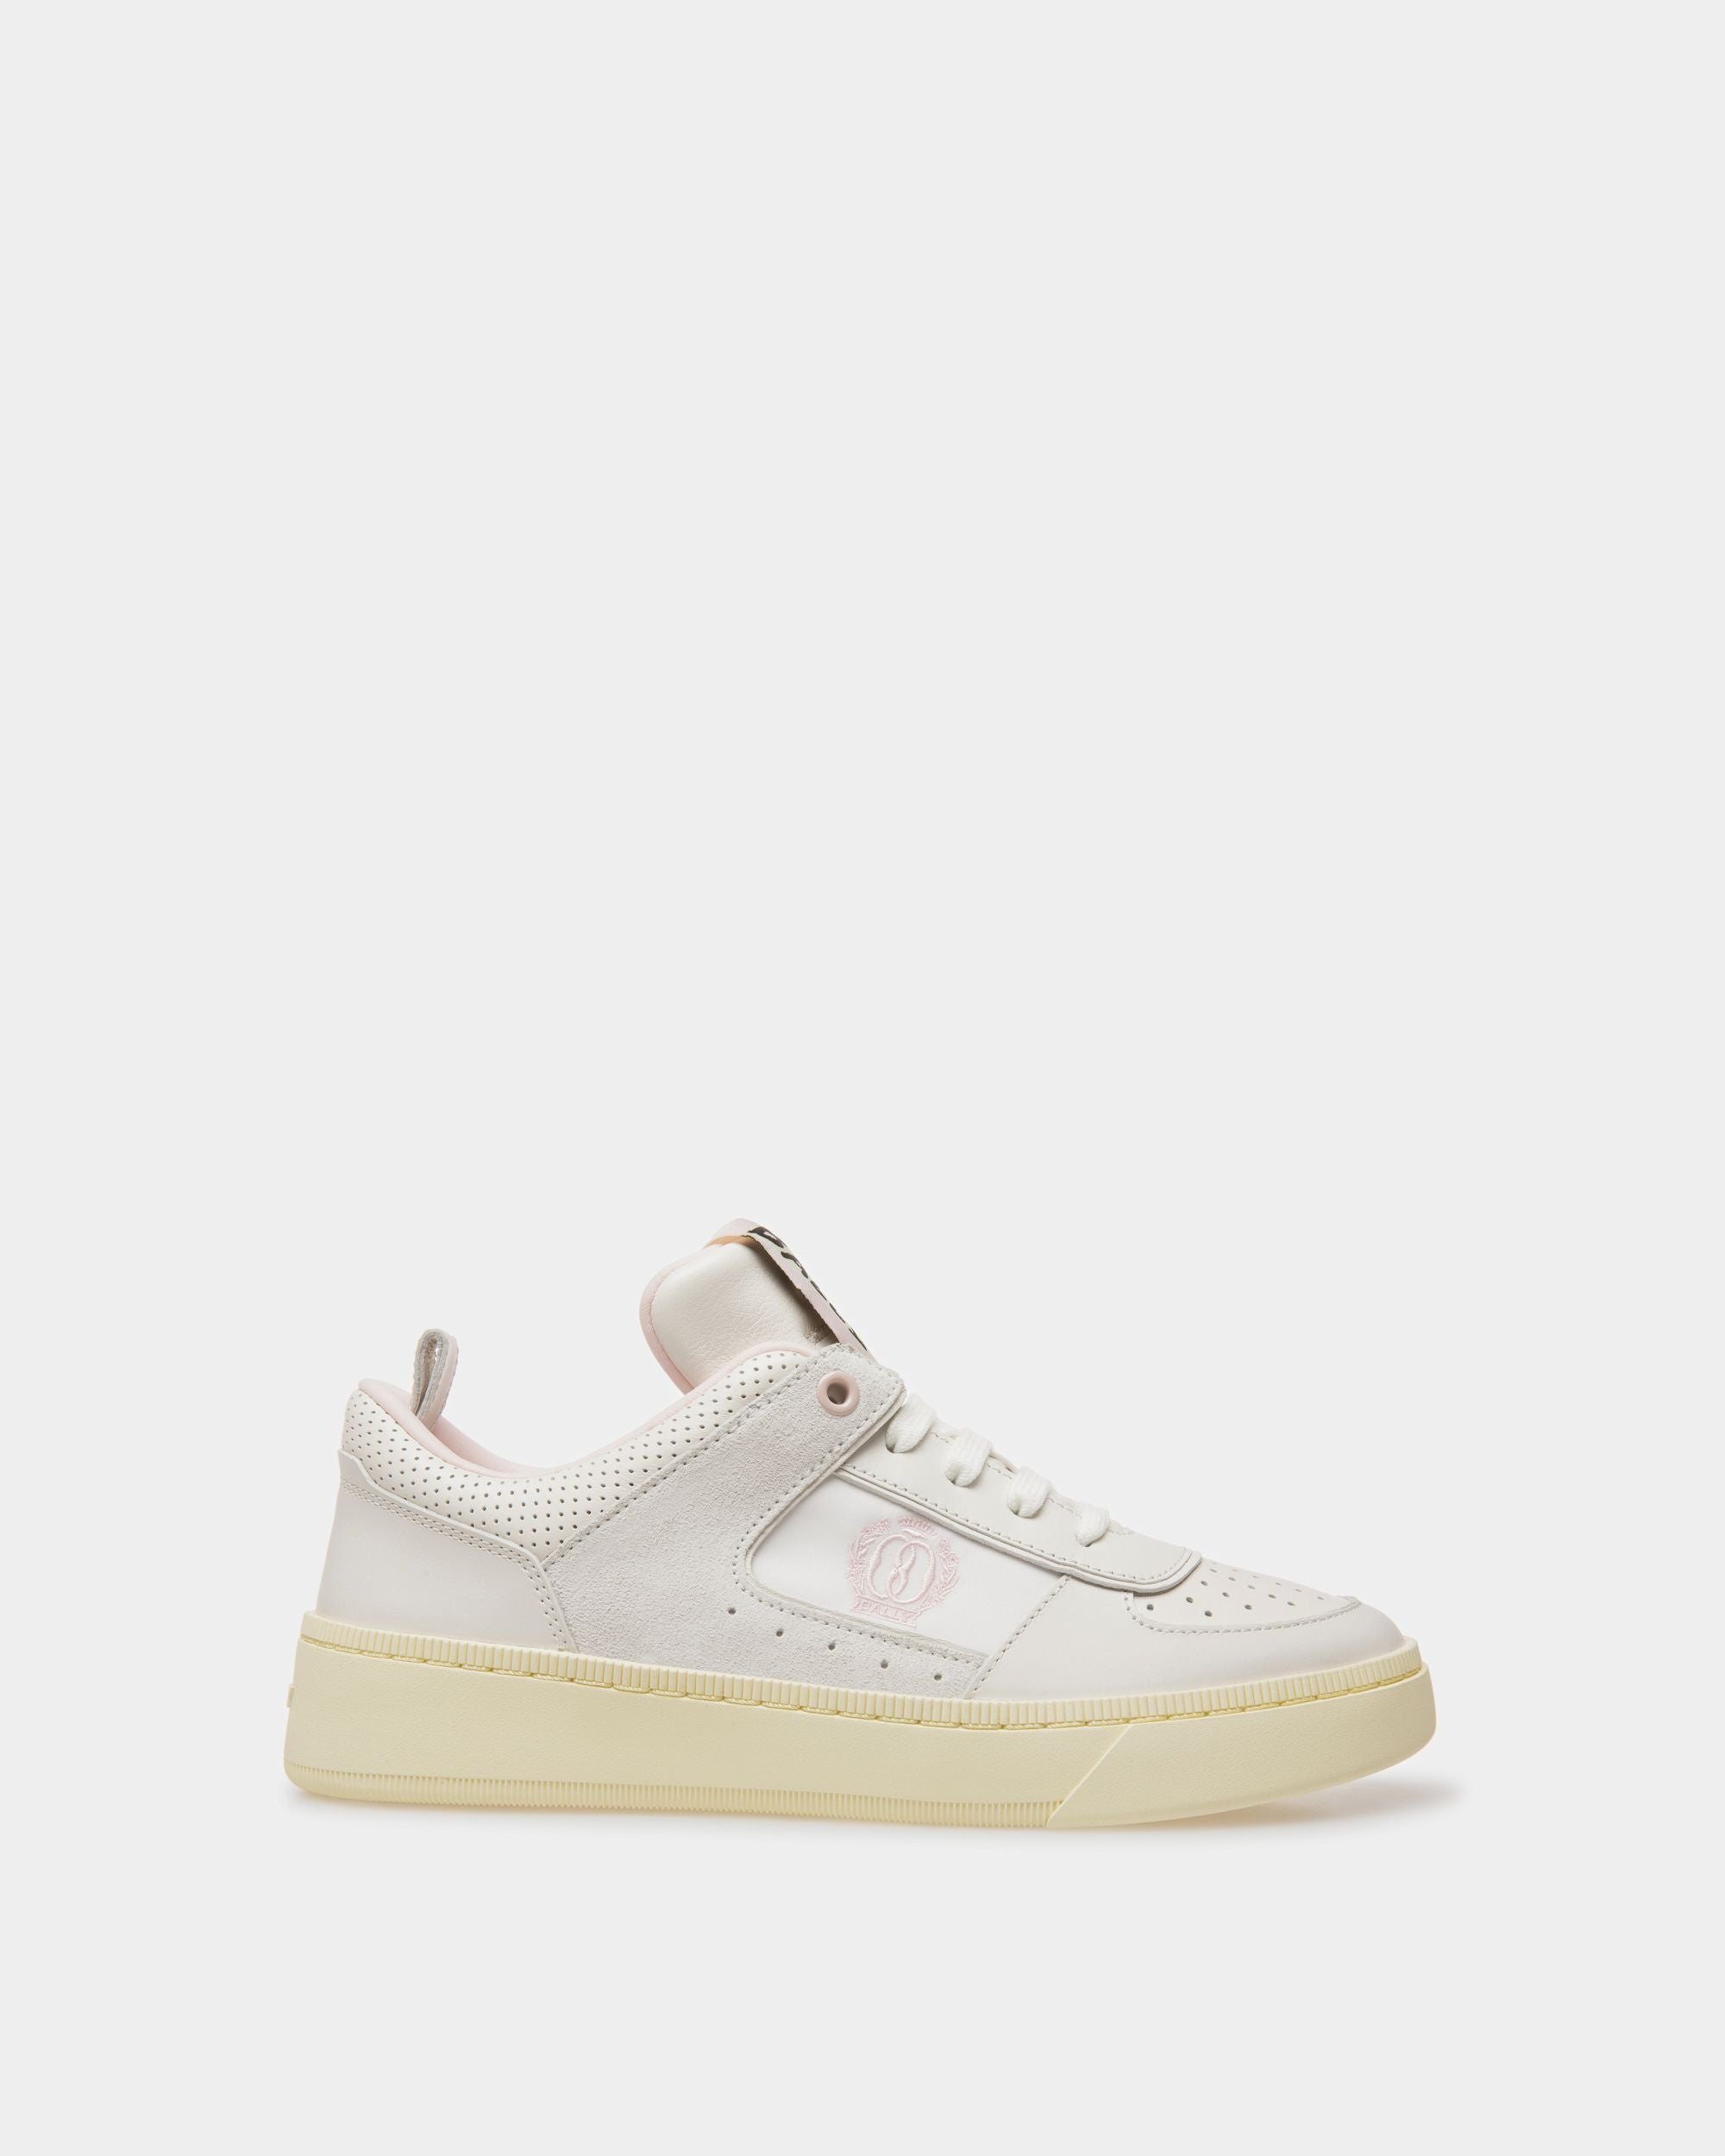 Riweira | Women's Sneakers | White And Pink Leather | Bally | Still Life Side